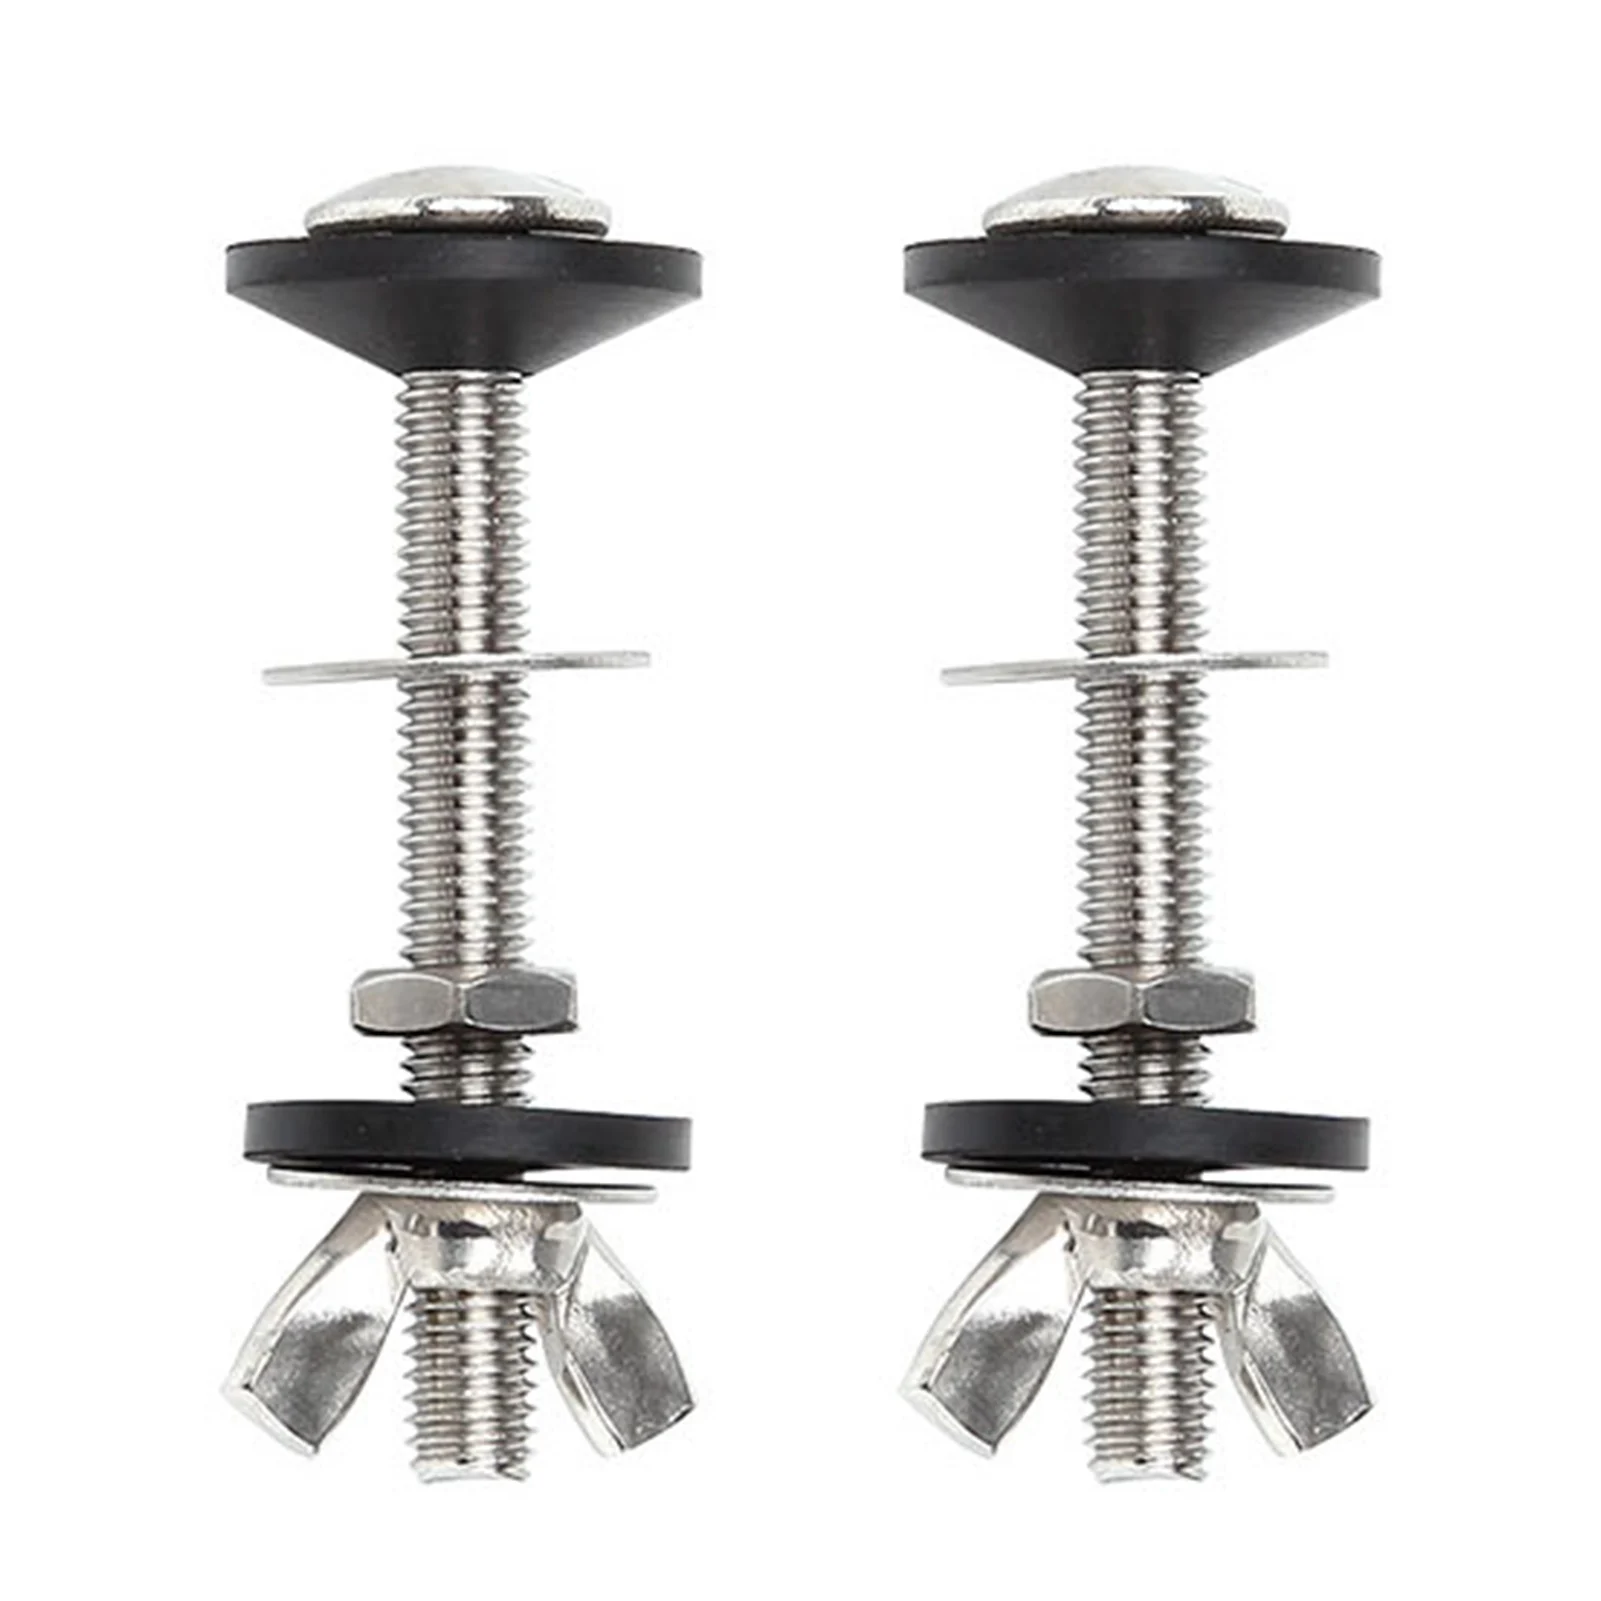 2 Pieces Of Toilet Accessories Water Tank Bolt Set Household Fixing Bolt Set Universal Durable Bathroom Stainless Steel Toilet